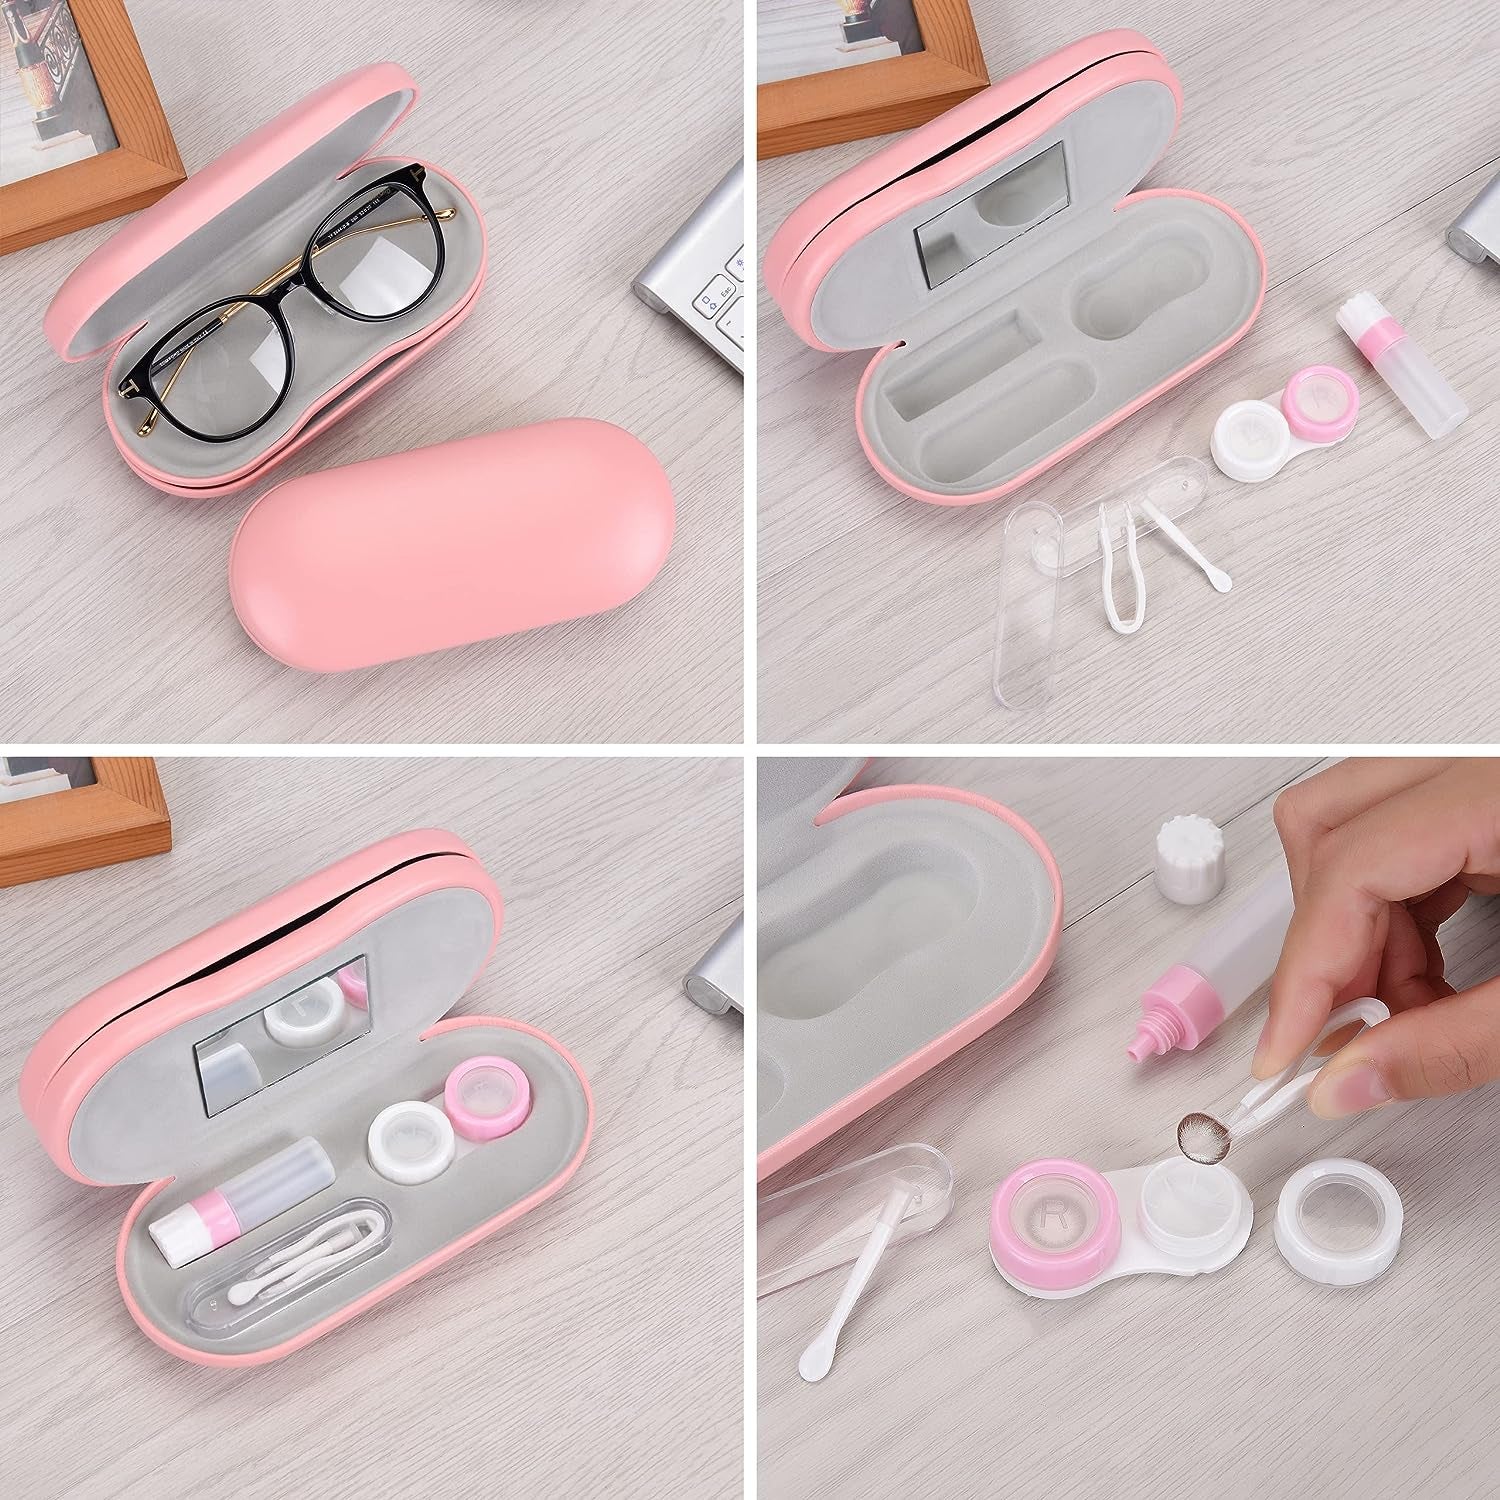 How cute are these Mallows Mini Travel items 🥰 Ideal for the perfect